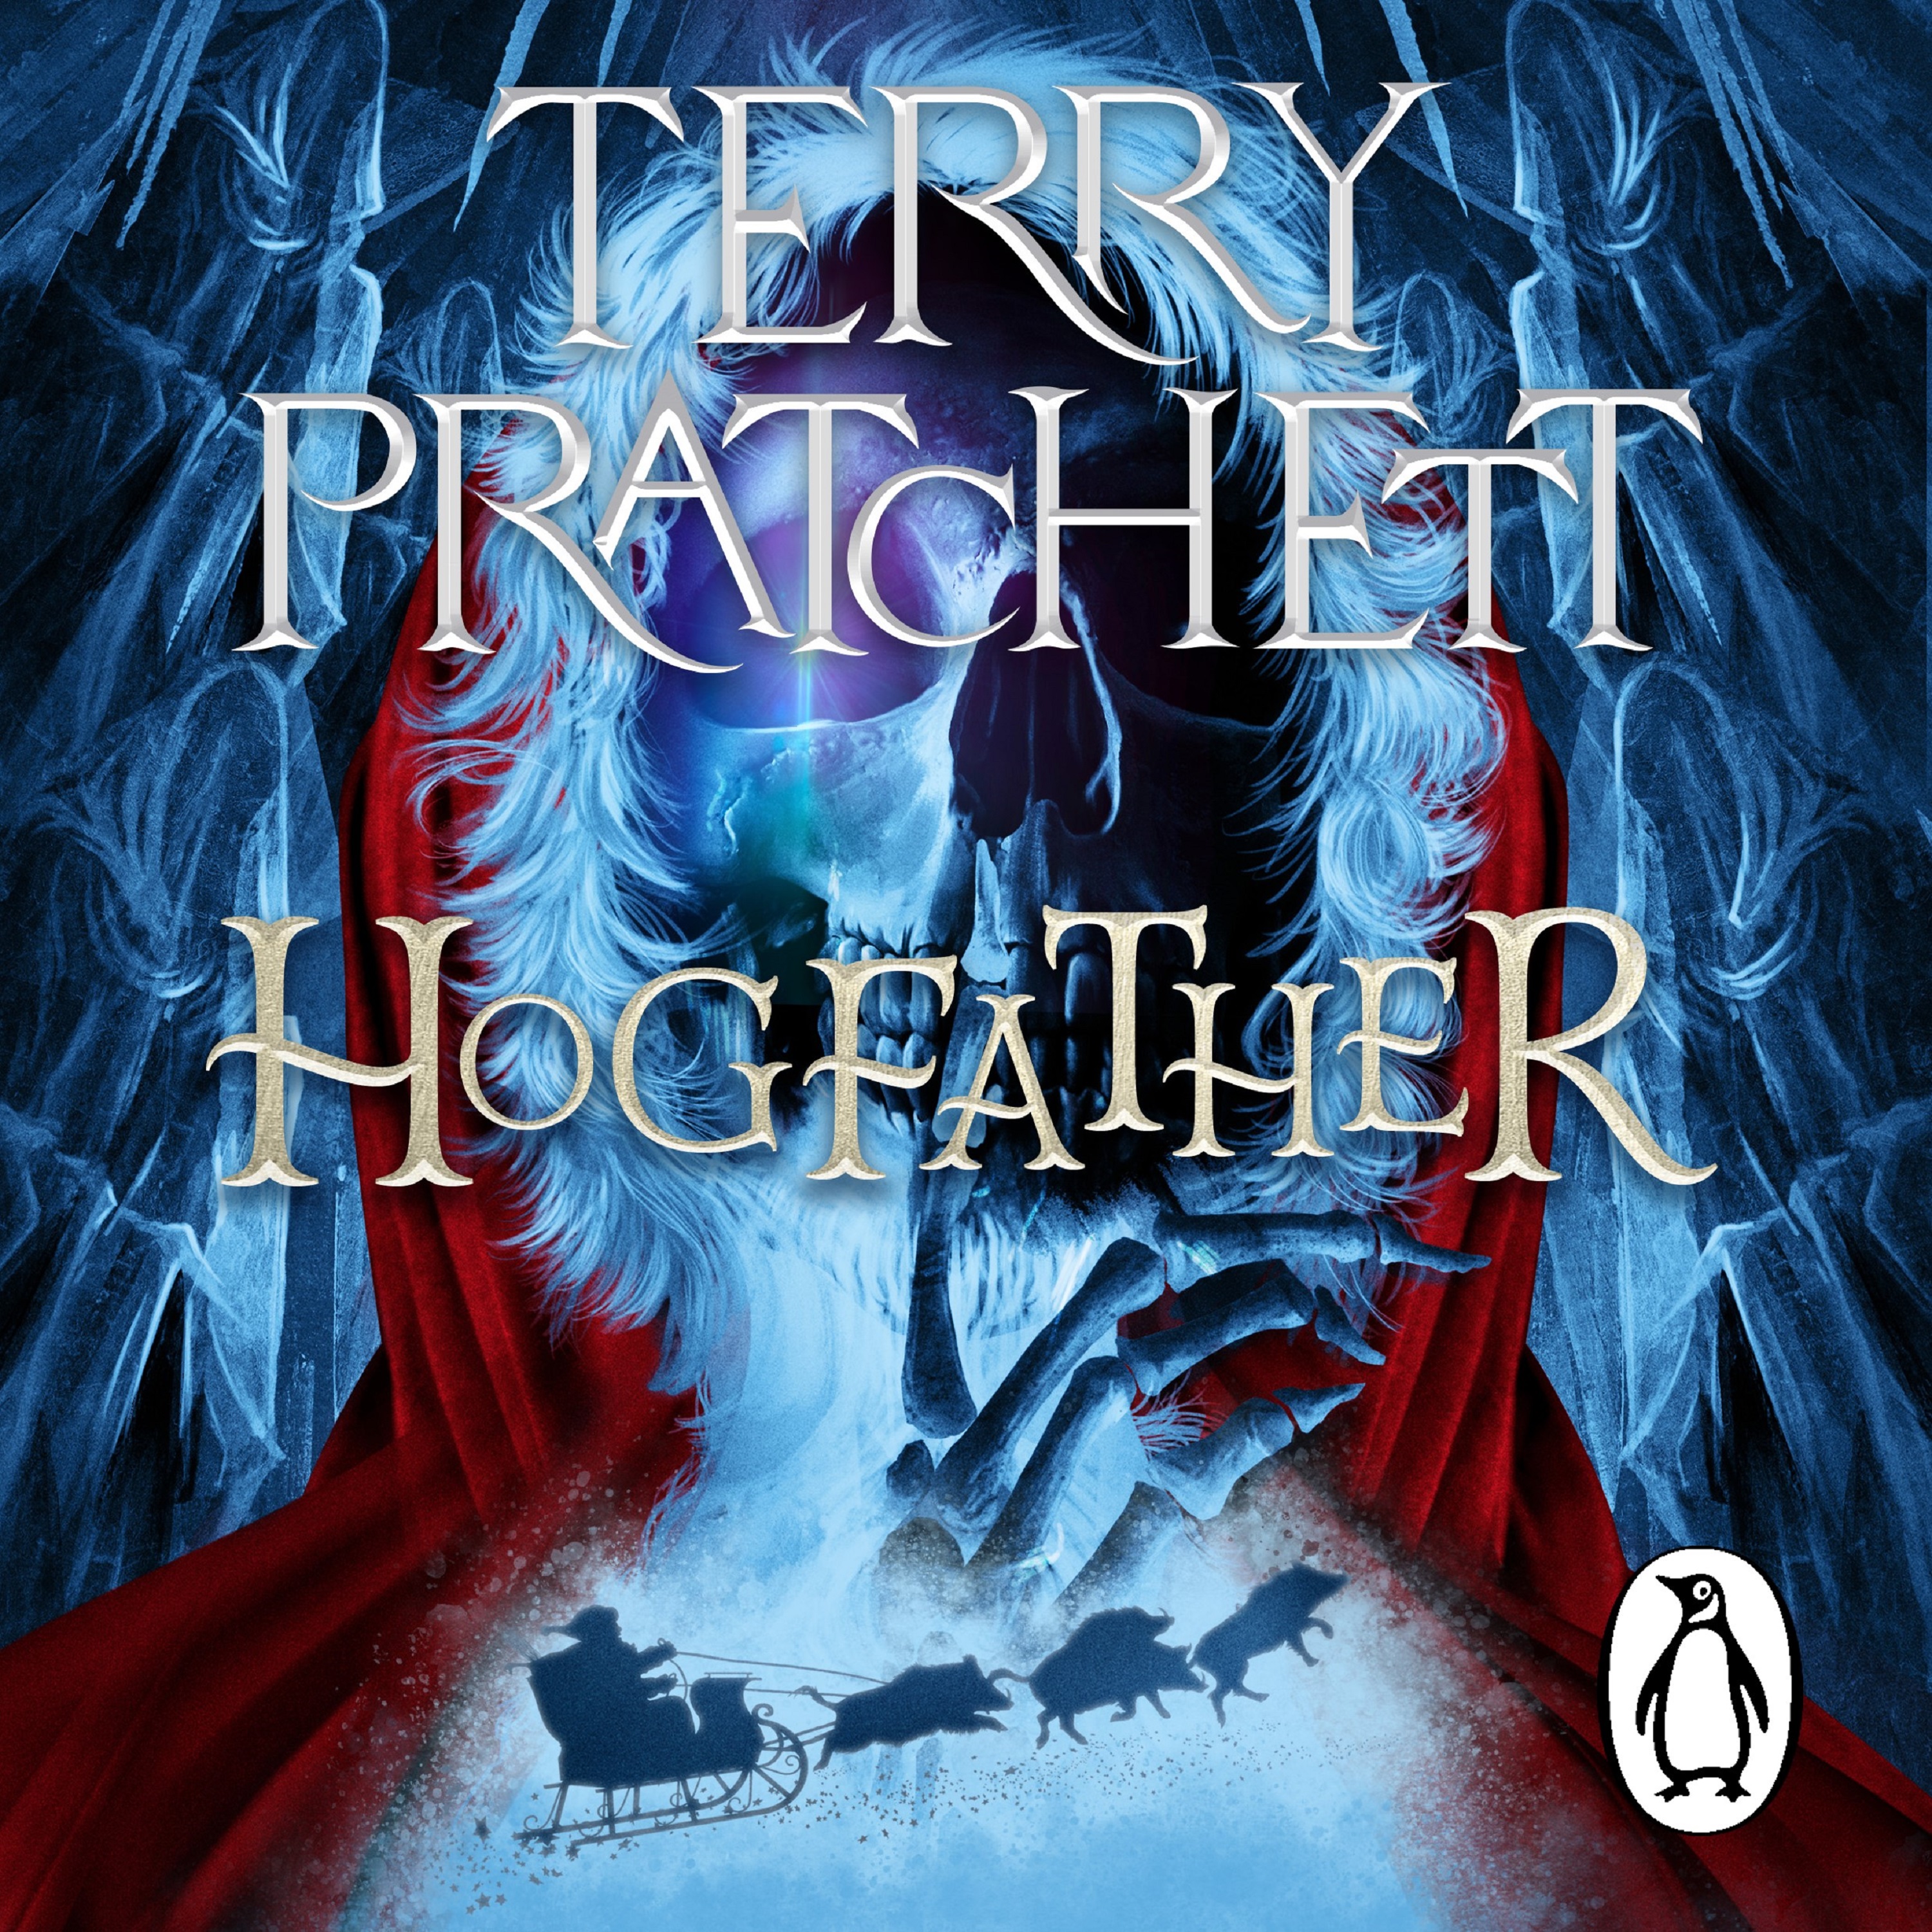 Audiobook image for Hogfather: A blue colour palette, with Death wearing a Santa hood in the background, with a silhouette of a sleigh and reindeer at the bottom. Terry Pratchett's name and the title are in large silver font across the centre.